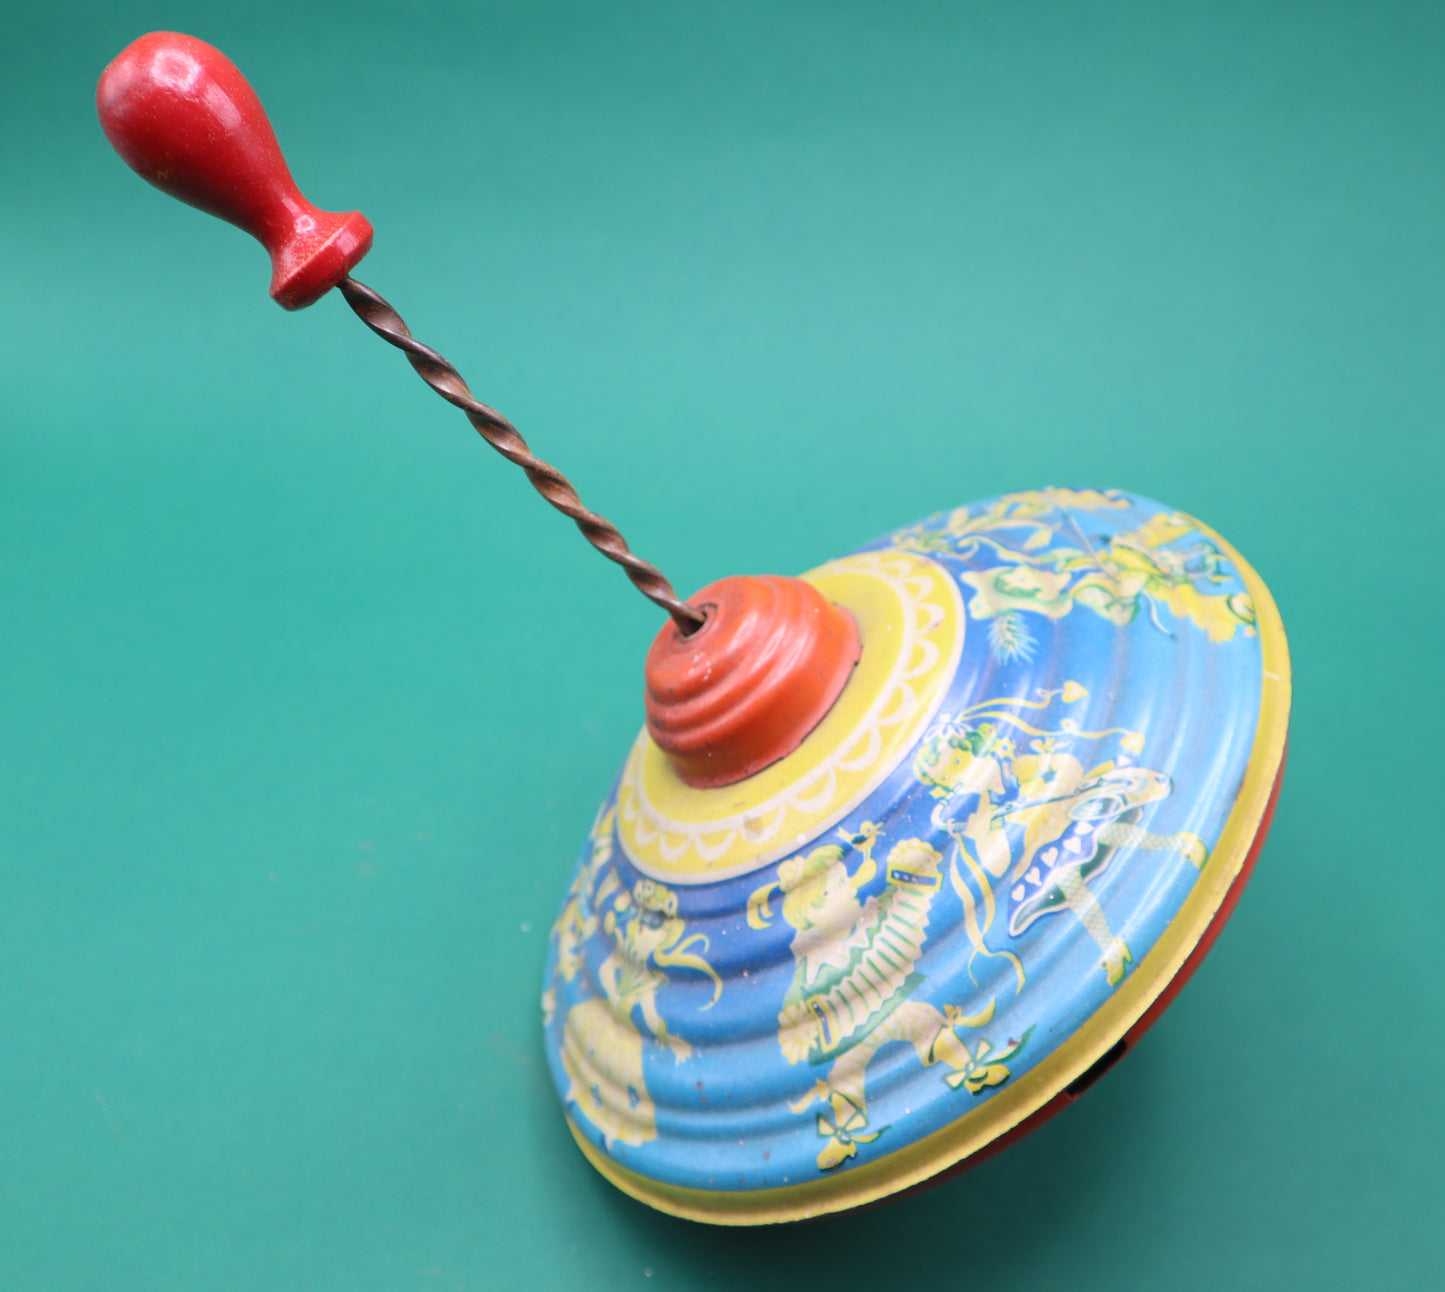 Vintage Spinning top toy collectable rare Tin Trottola Antica in latta colorata